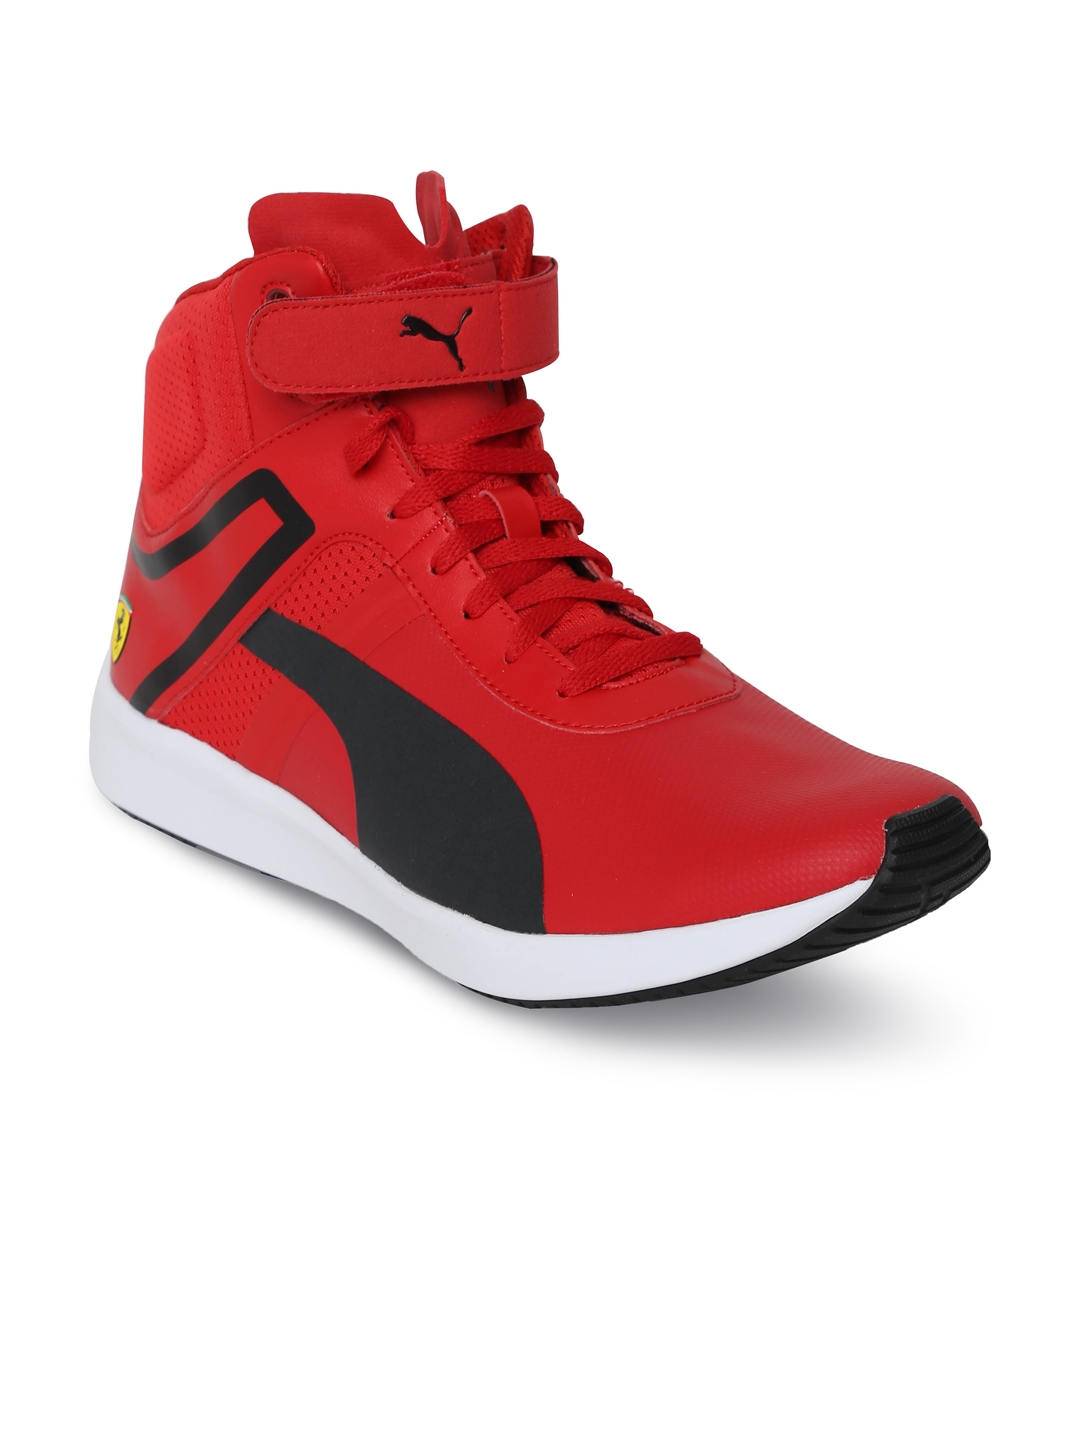 Puma Men Red Printed Synthetic Leather 